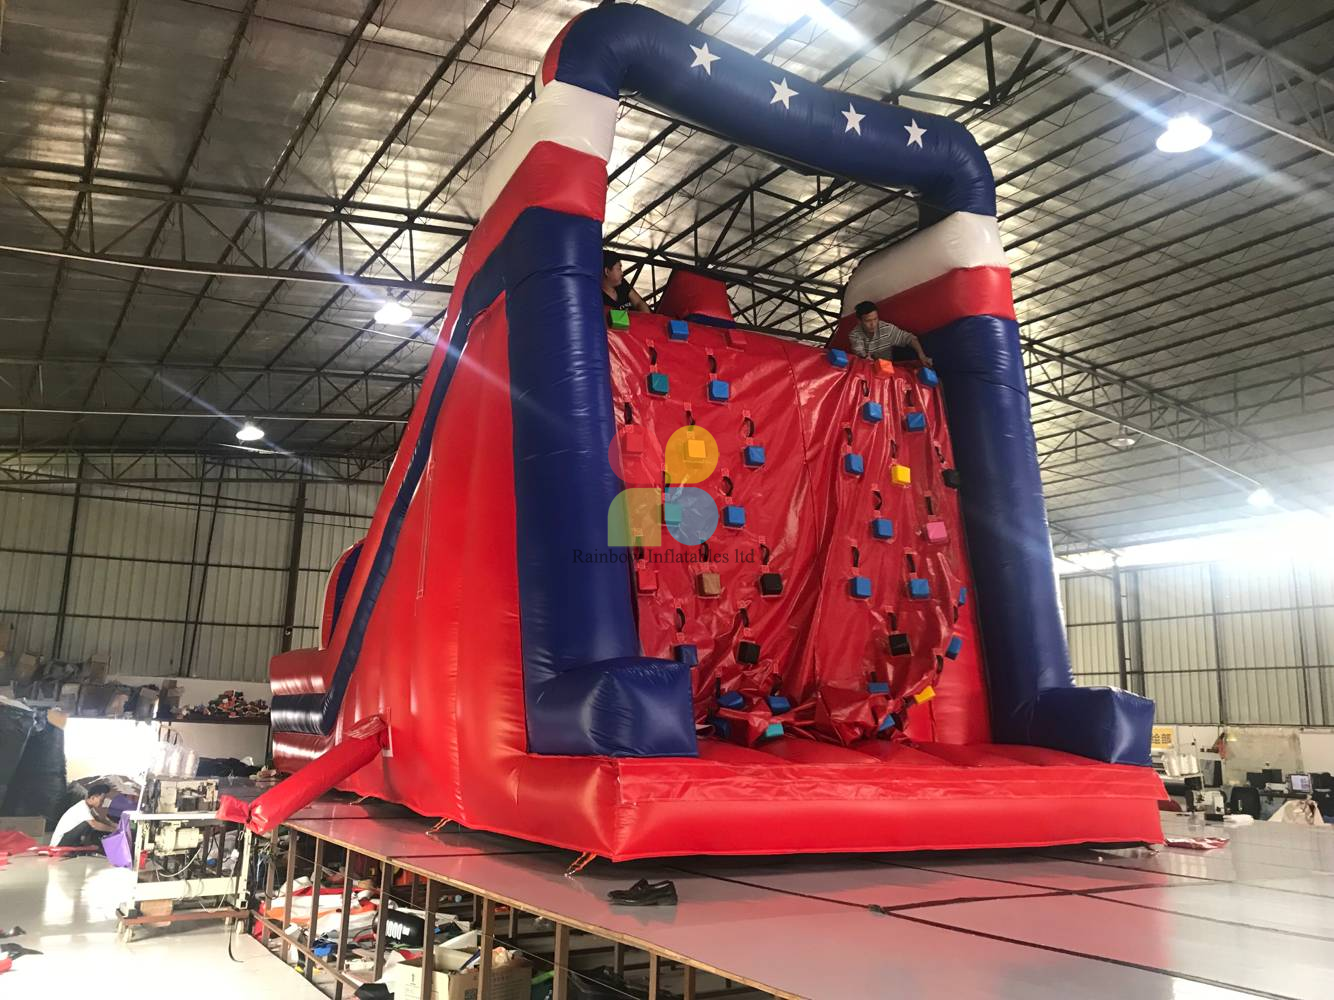 Outdoor Inflatable racing Obstacle Course Game 5k Inflatables